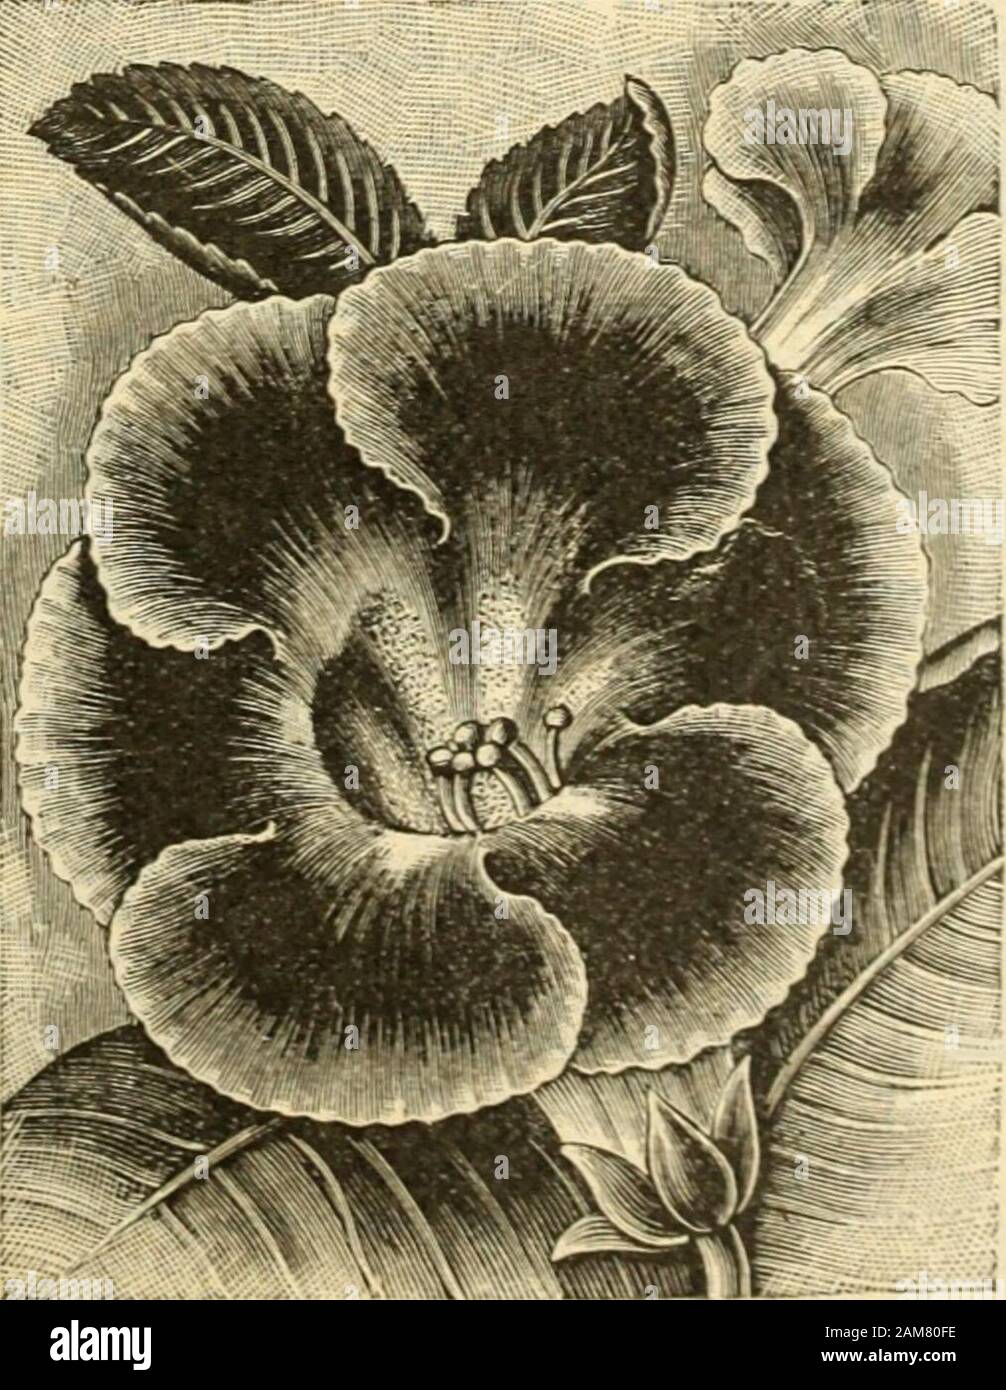 Seed annual, 1899 . thous-ands, each year bringing forth newand choice selections which havebeen produced from seed, which isthe only method of obtaining new-varieties. Half hardy perennial.Fine Mixed Pkt. 1 Sets GLADIOLUS. .. QROFFS HYBRIDS Mr. Groff is a most enthusiastic andsuccessful cultivator of the Gladi-olus, and under his skillful carethey develop remarkably well, fur-nishing flowers of marvelous sizeand beauty. He has crossed someof the finest sorts and saved theseed, so that we are able to offer avery superior strain Pkt. 3Sets For Gladiolus Bulbs, seepage 95.. *^ GLOBE AMARANTH. Gl Stock Photo